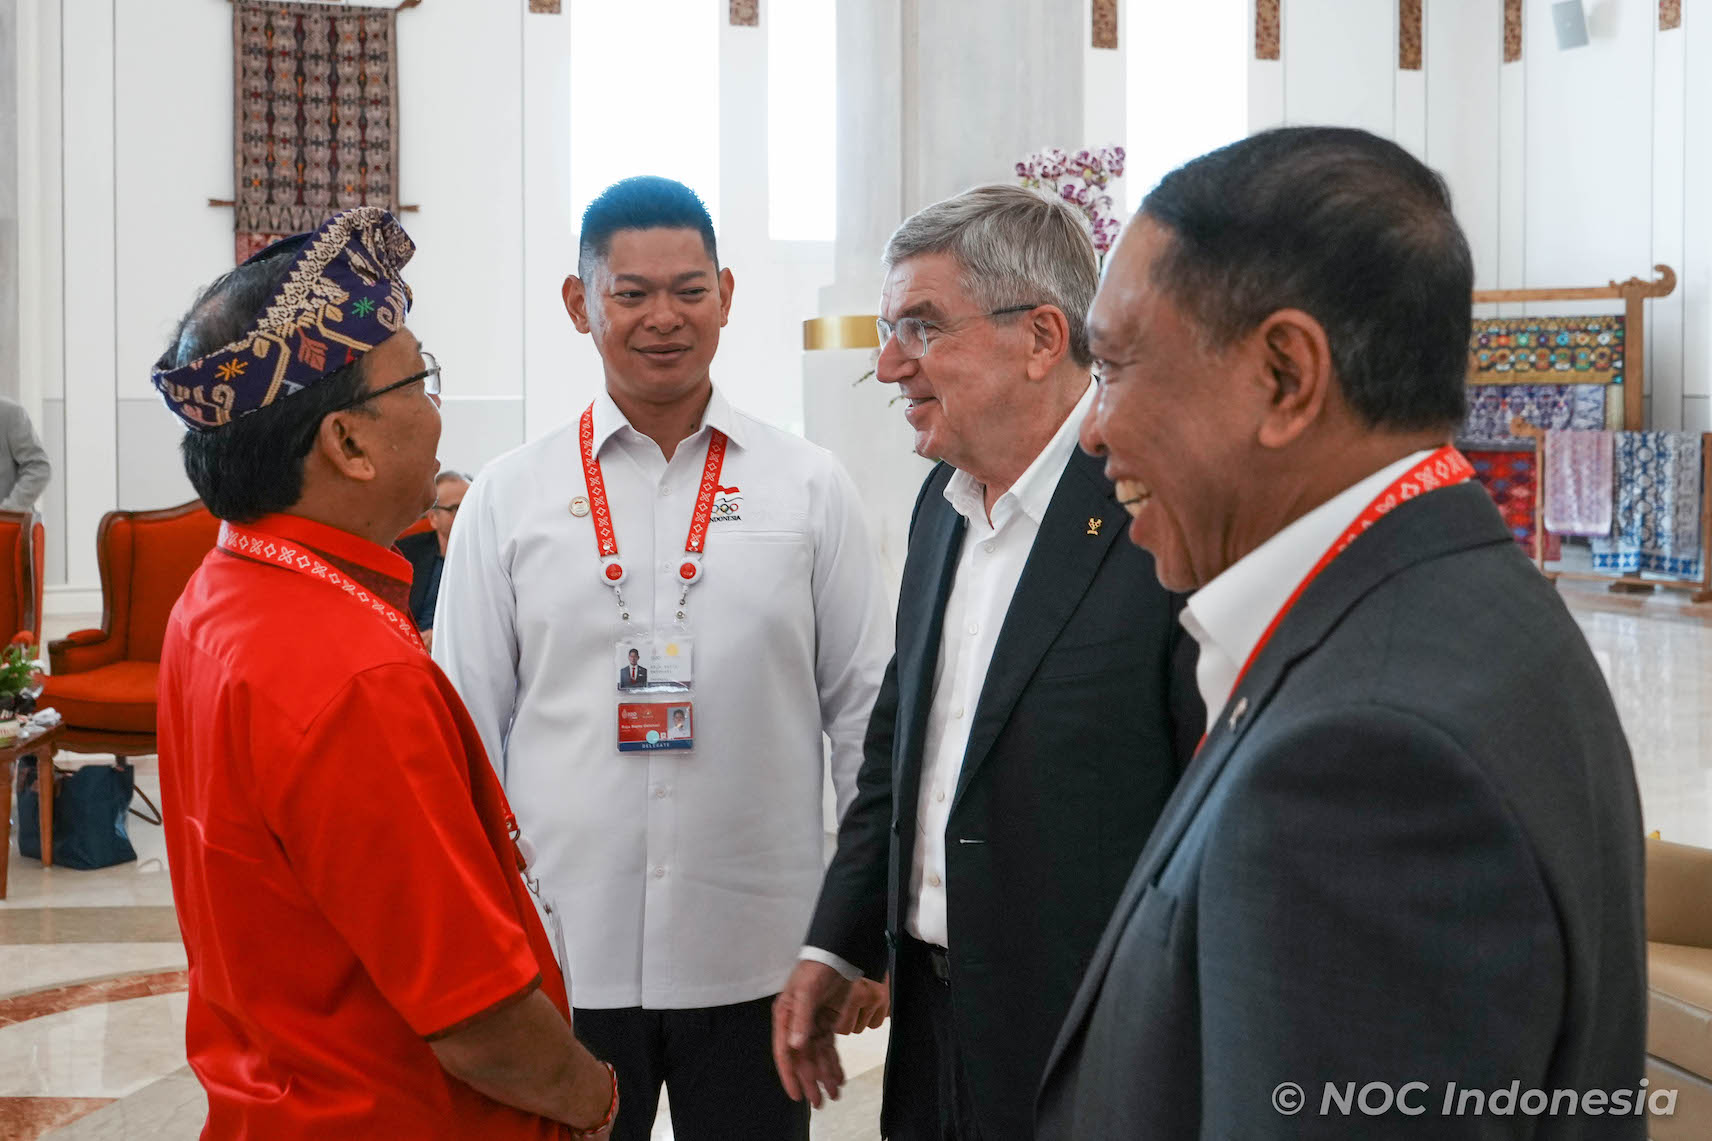 Indonesia Olympic Commitee - Minister of Sports, and President of NOC Indonesia welcome Thomas Bach's arrival in Bali